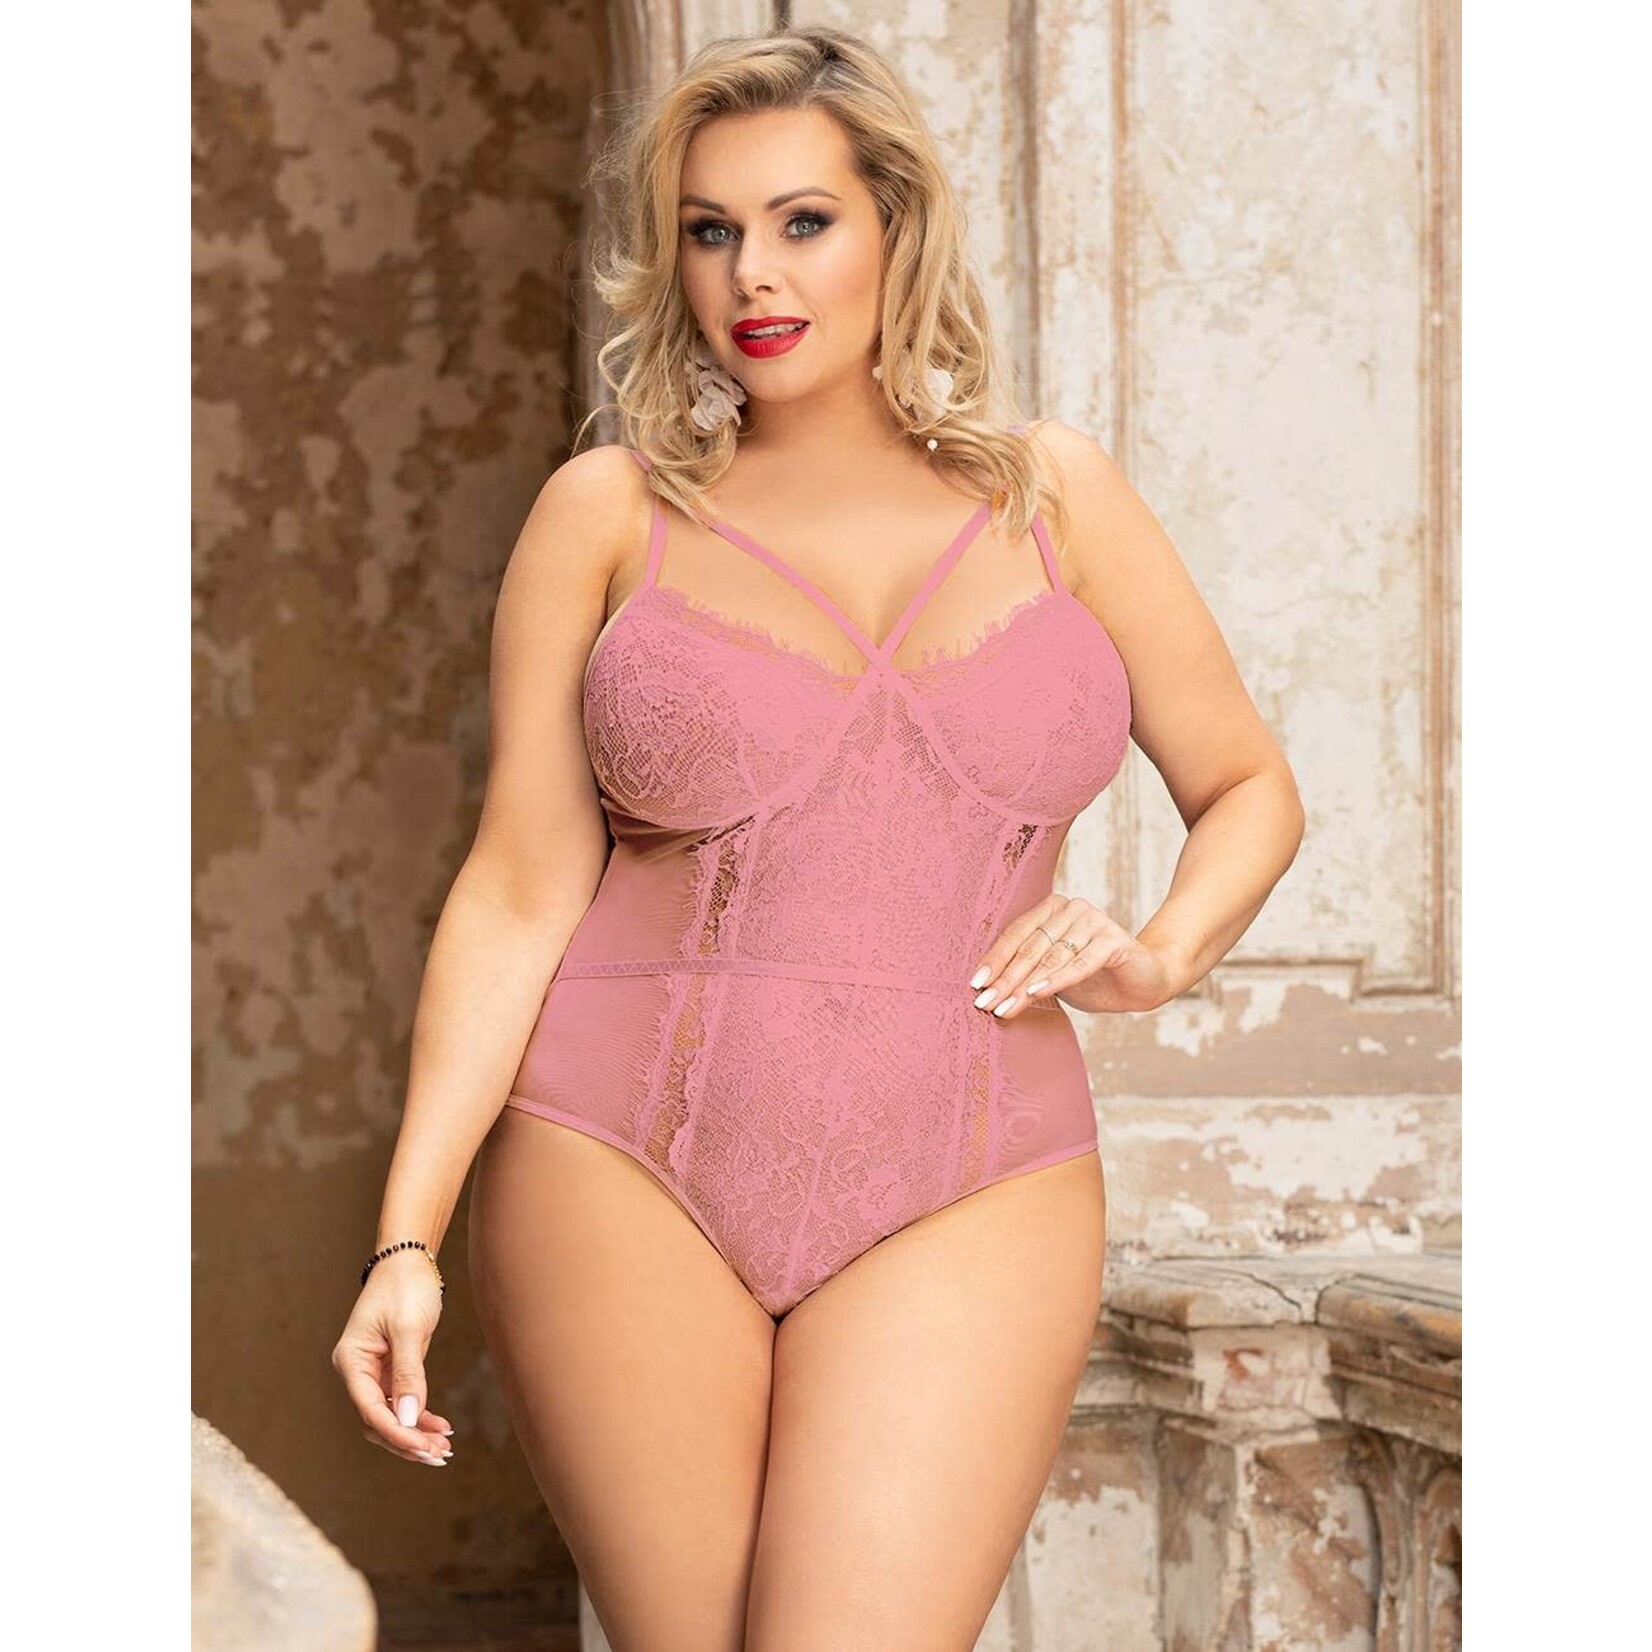 OH YEAH! -  PLUS SIZE BODYSUIT WITHOUT UNDERWIRE PINK LACE OPENABLE CROTCH LINGERIE XL-2XL